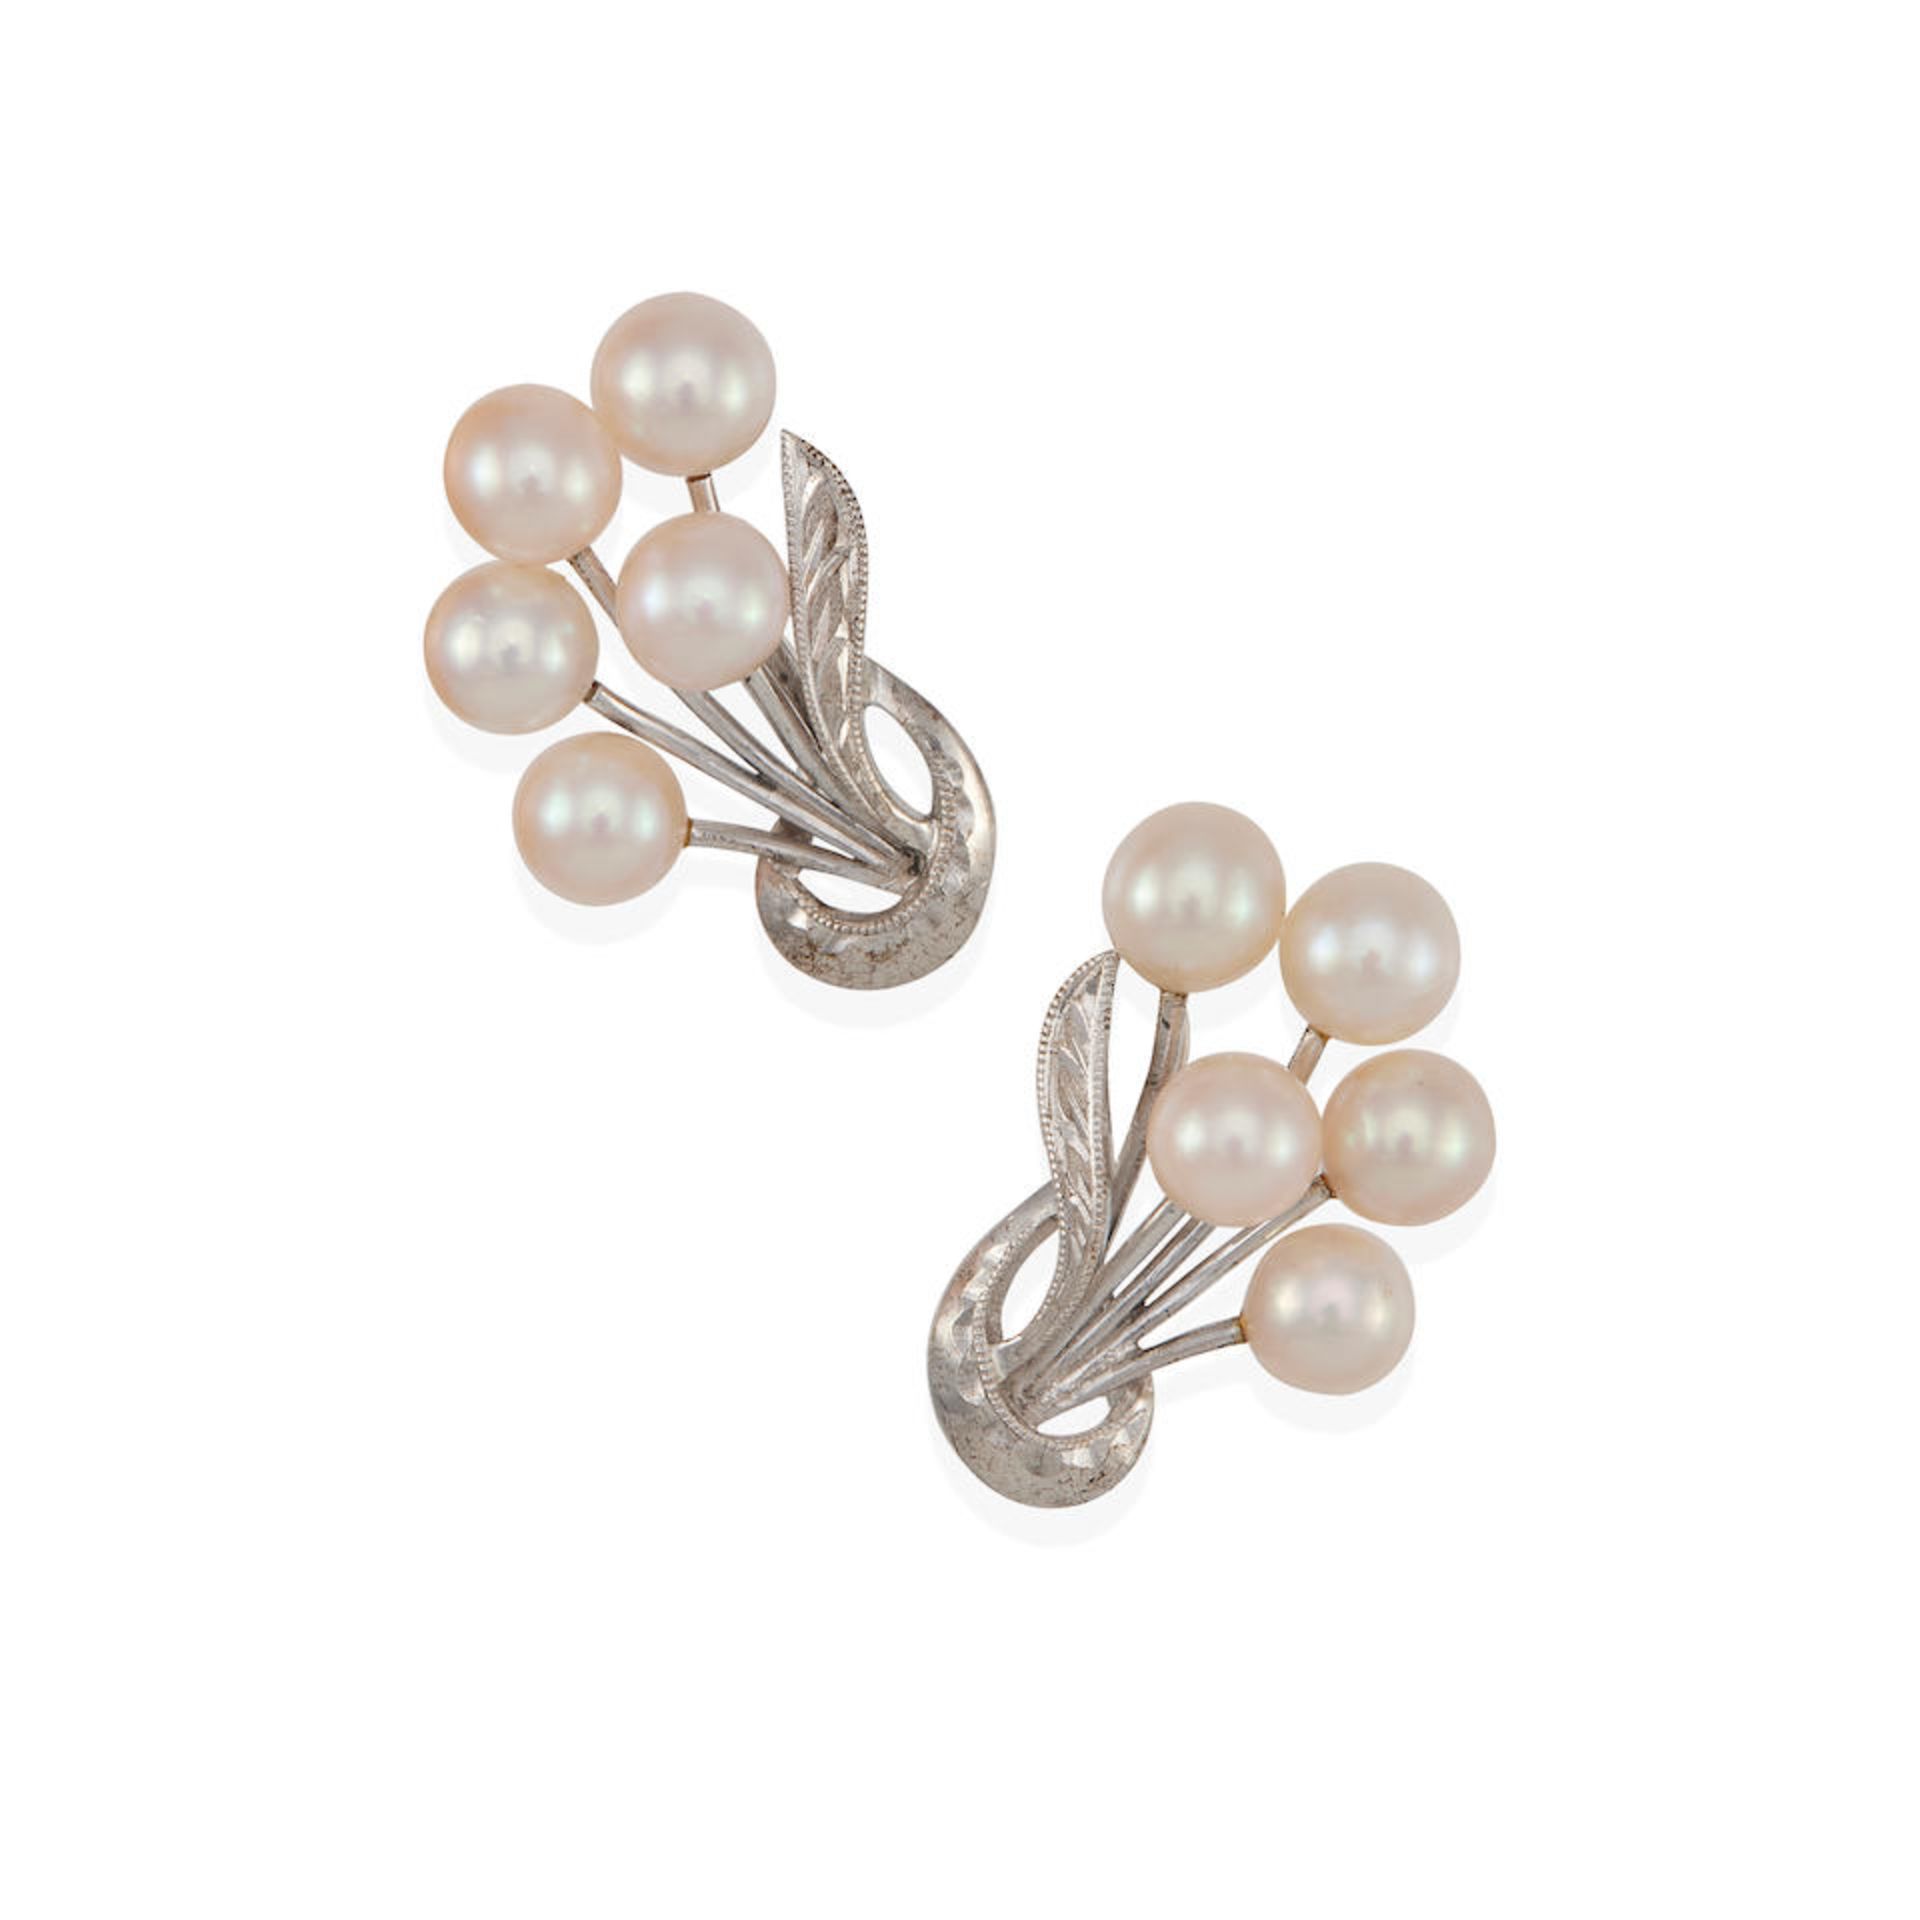 MIKIMOTO: A PAIR OF SILVER AND CULTURED PEARL EARRINGS